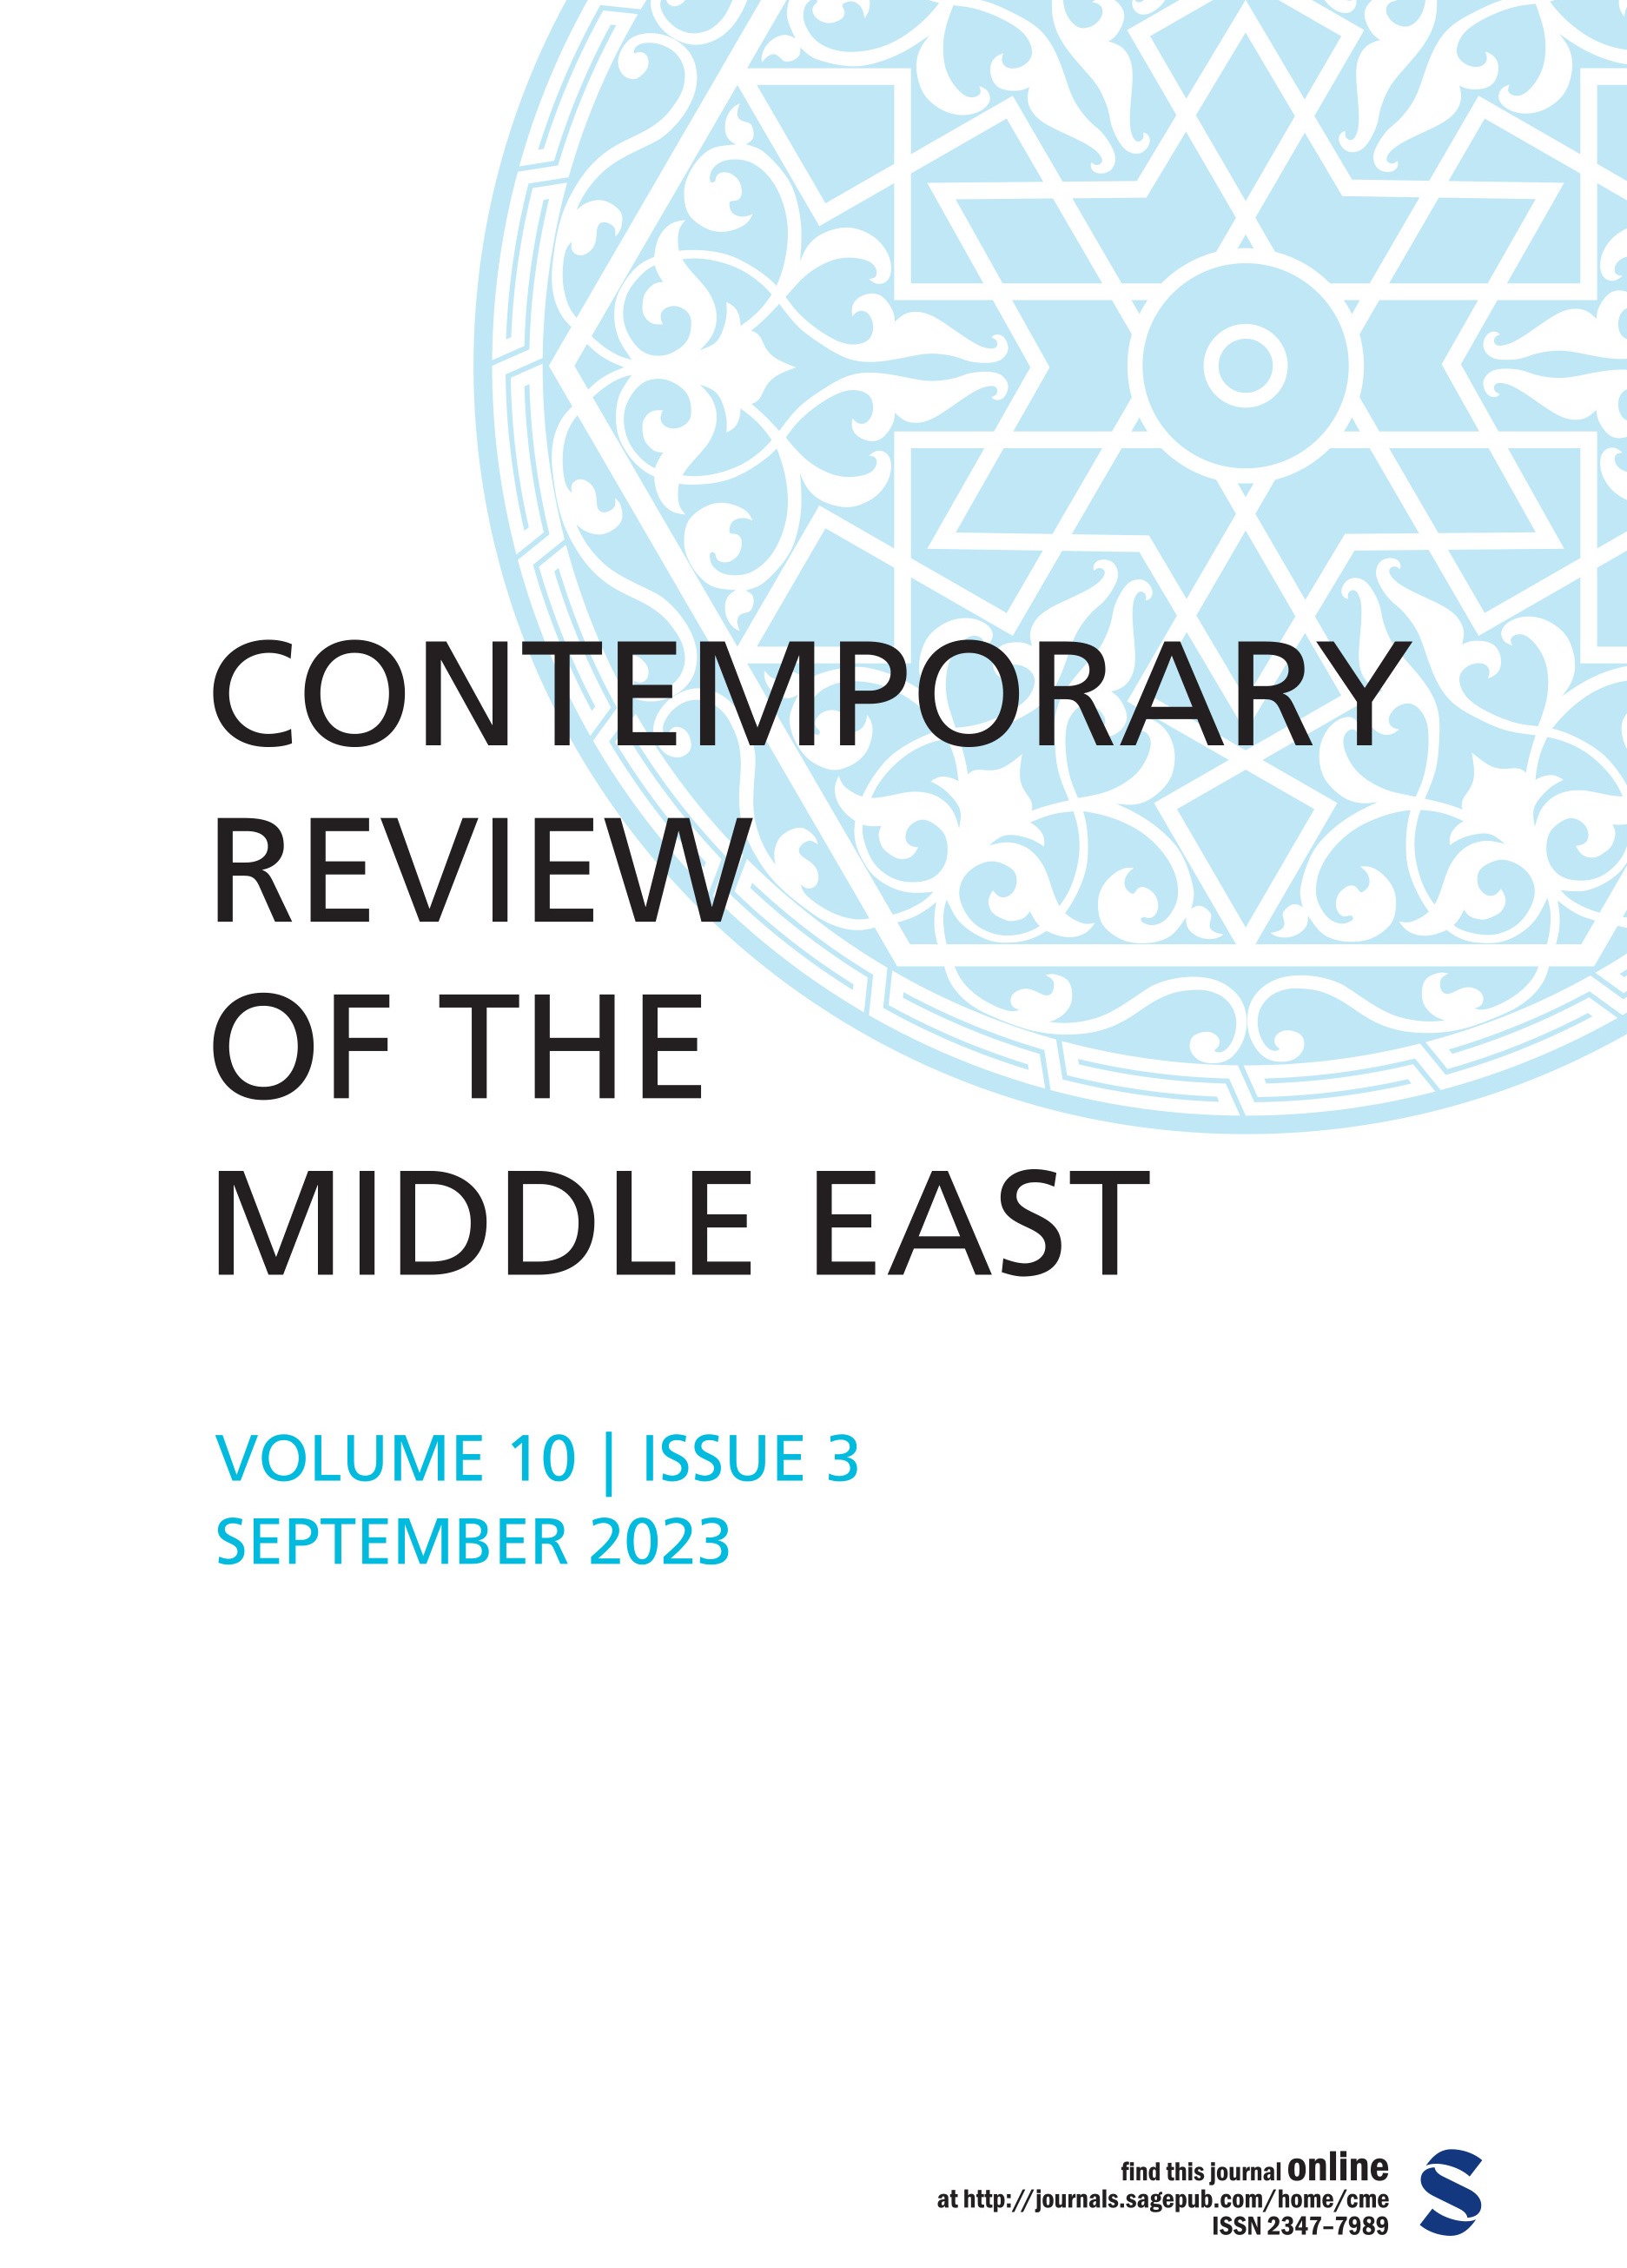 Contemporary Review of the Middle East Volume 10 Issue 3, September 2023: Contents